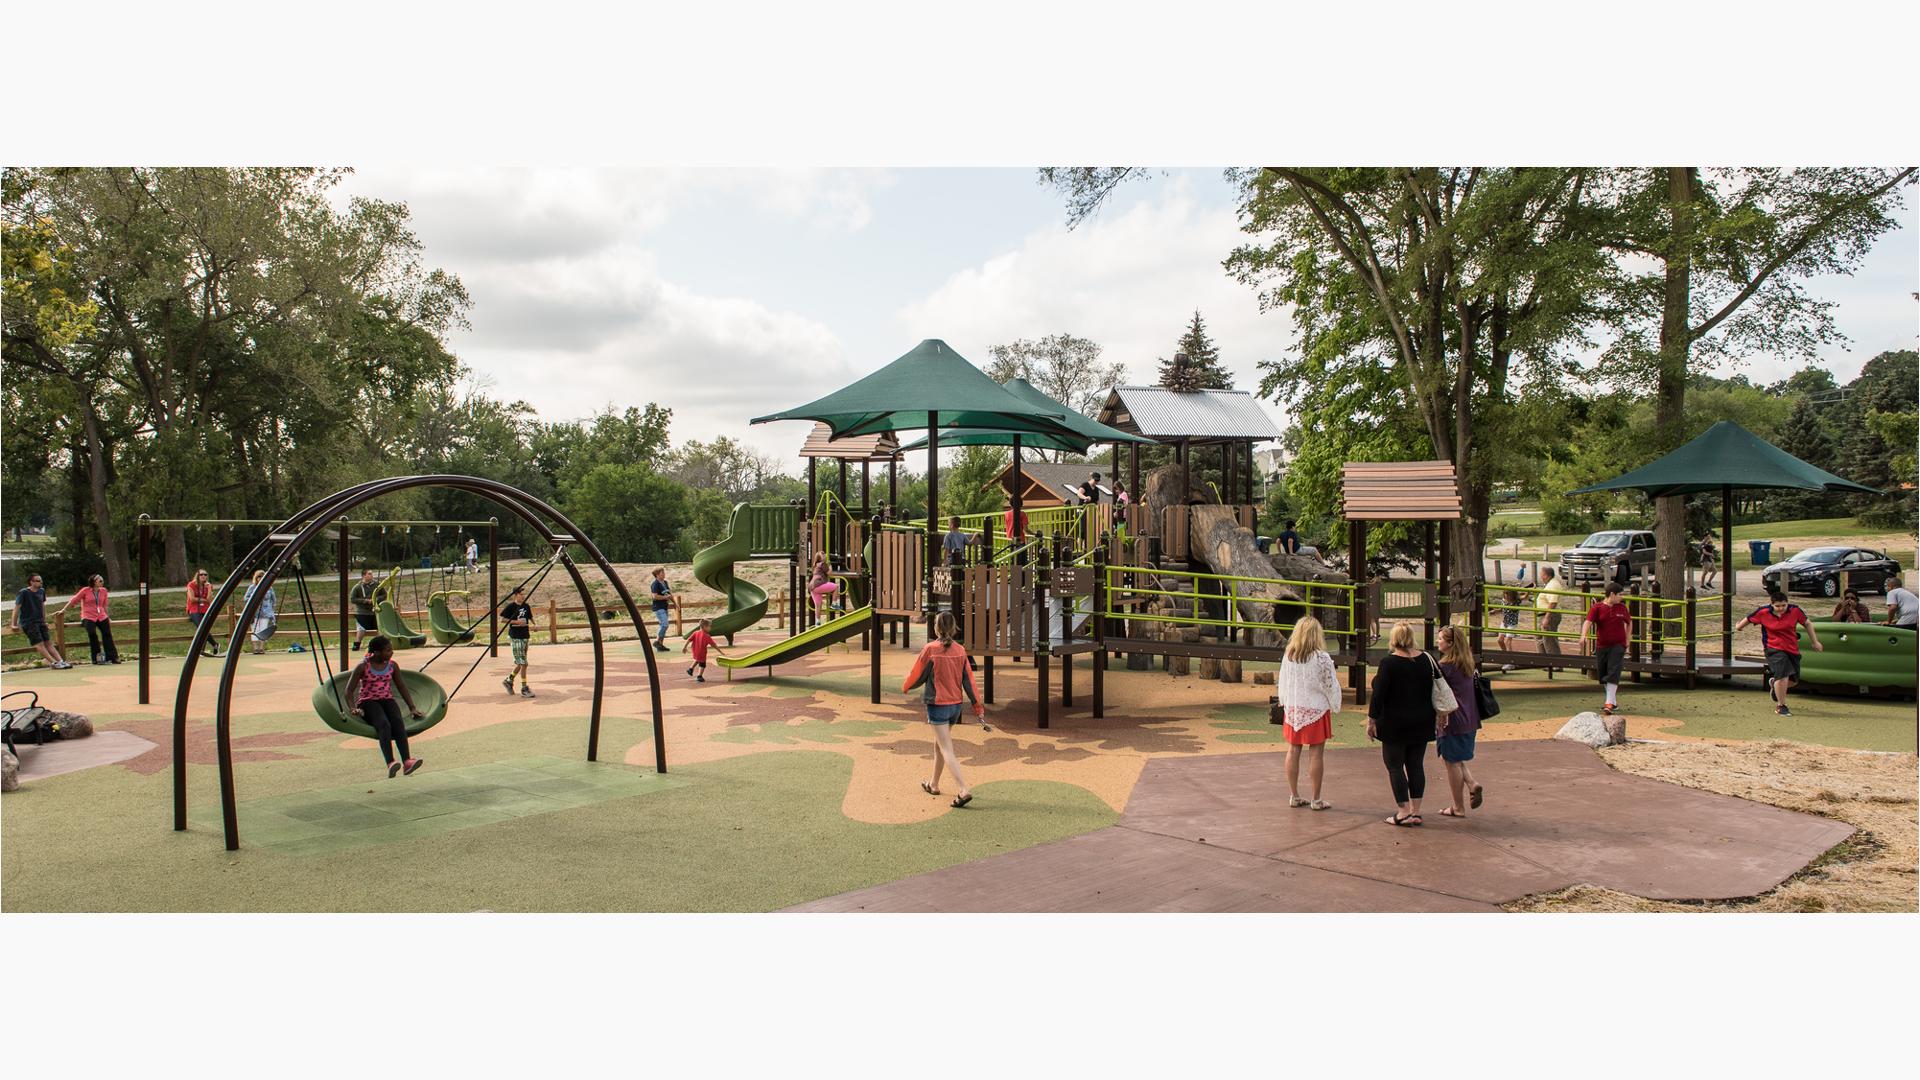 This naturally-themed playground is full of children of all abilities accessing this playground's amenities. A girl sits on the Oodle swing. Parents enjoy the Sway fun and kids use the different ramps to get from one place to another.